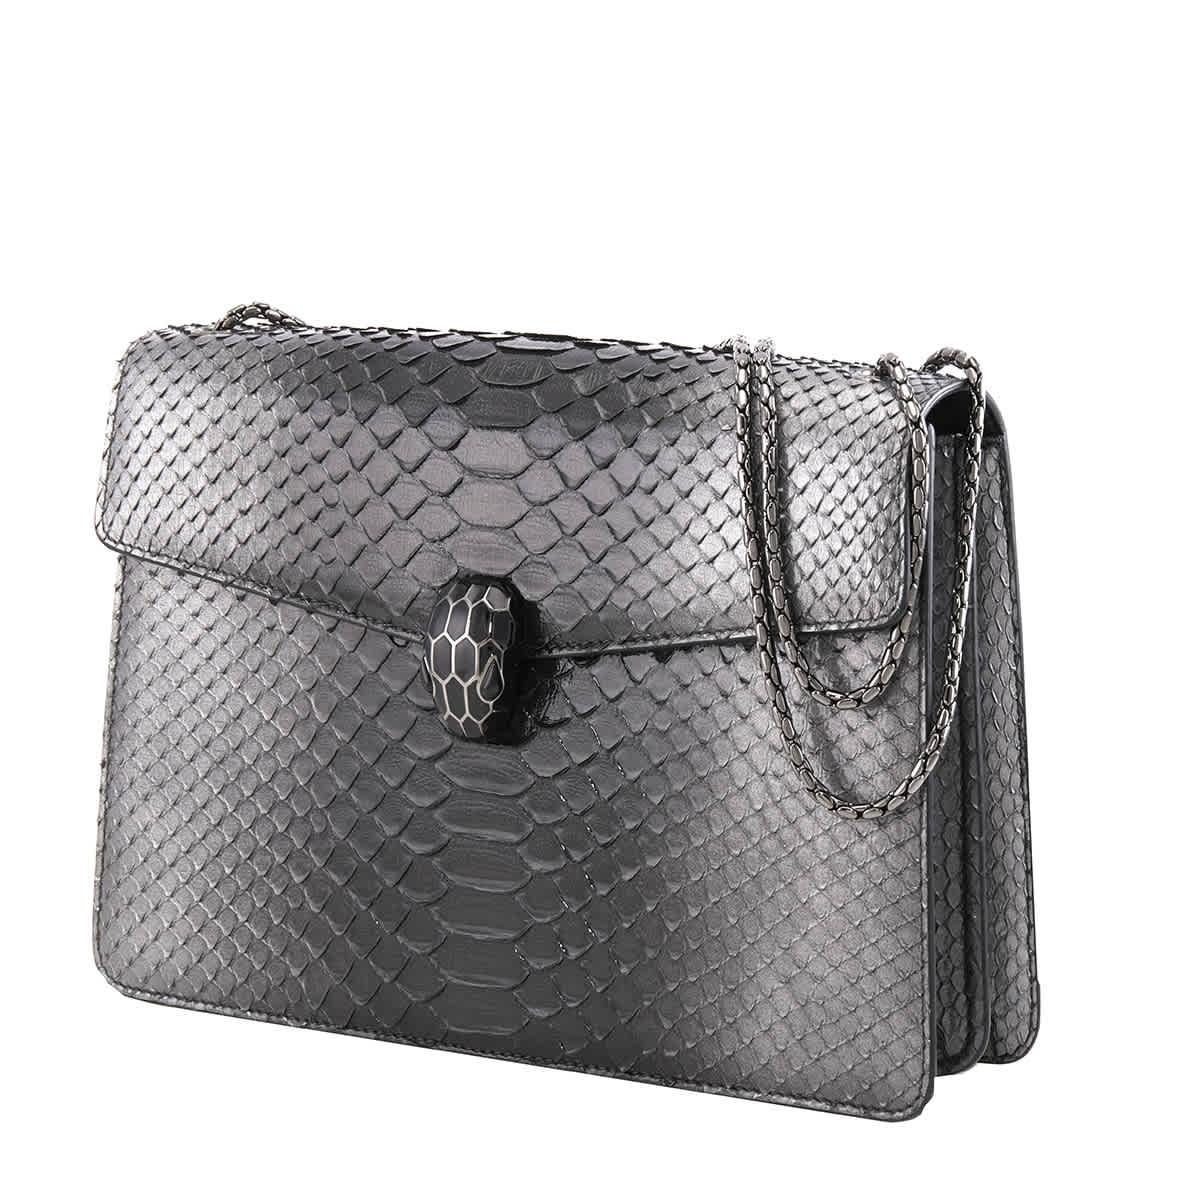 Bvlgari Women's Serpenti Forever Python Top-Handle Bag One-Size Neutral